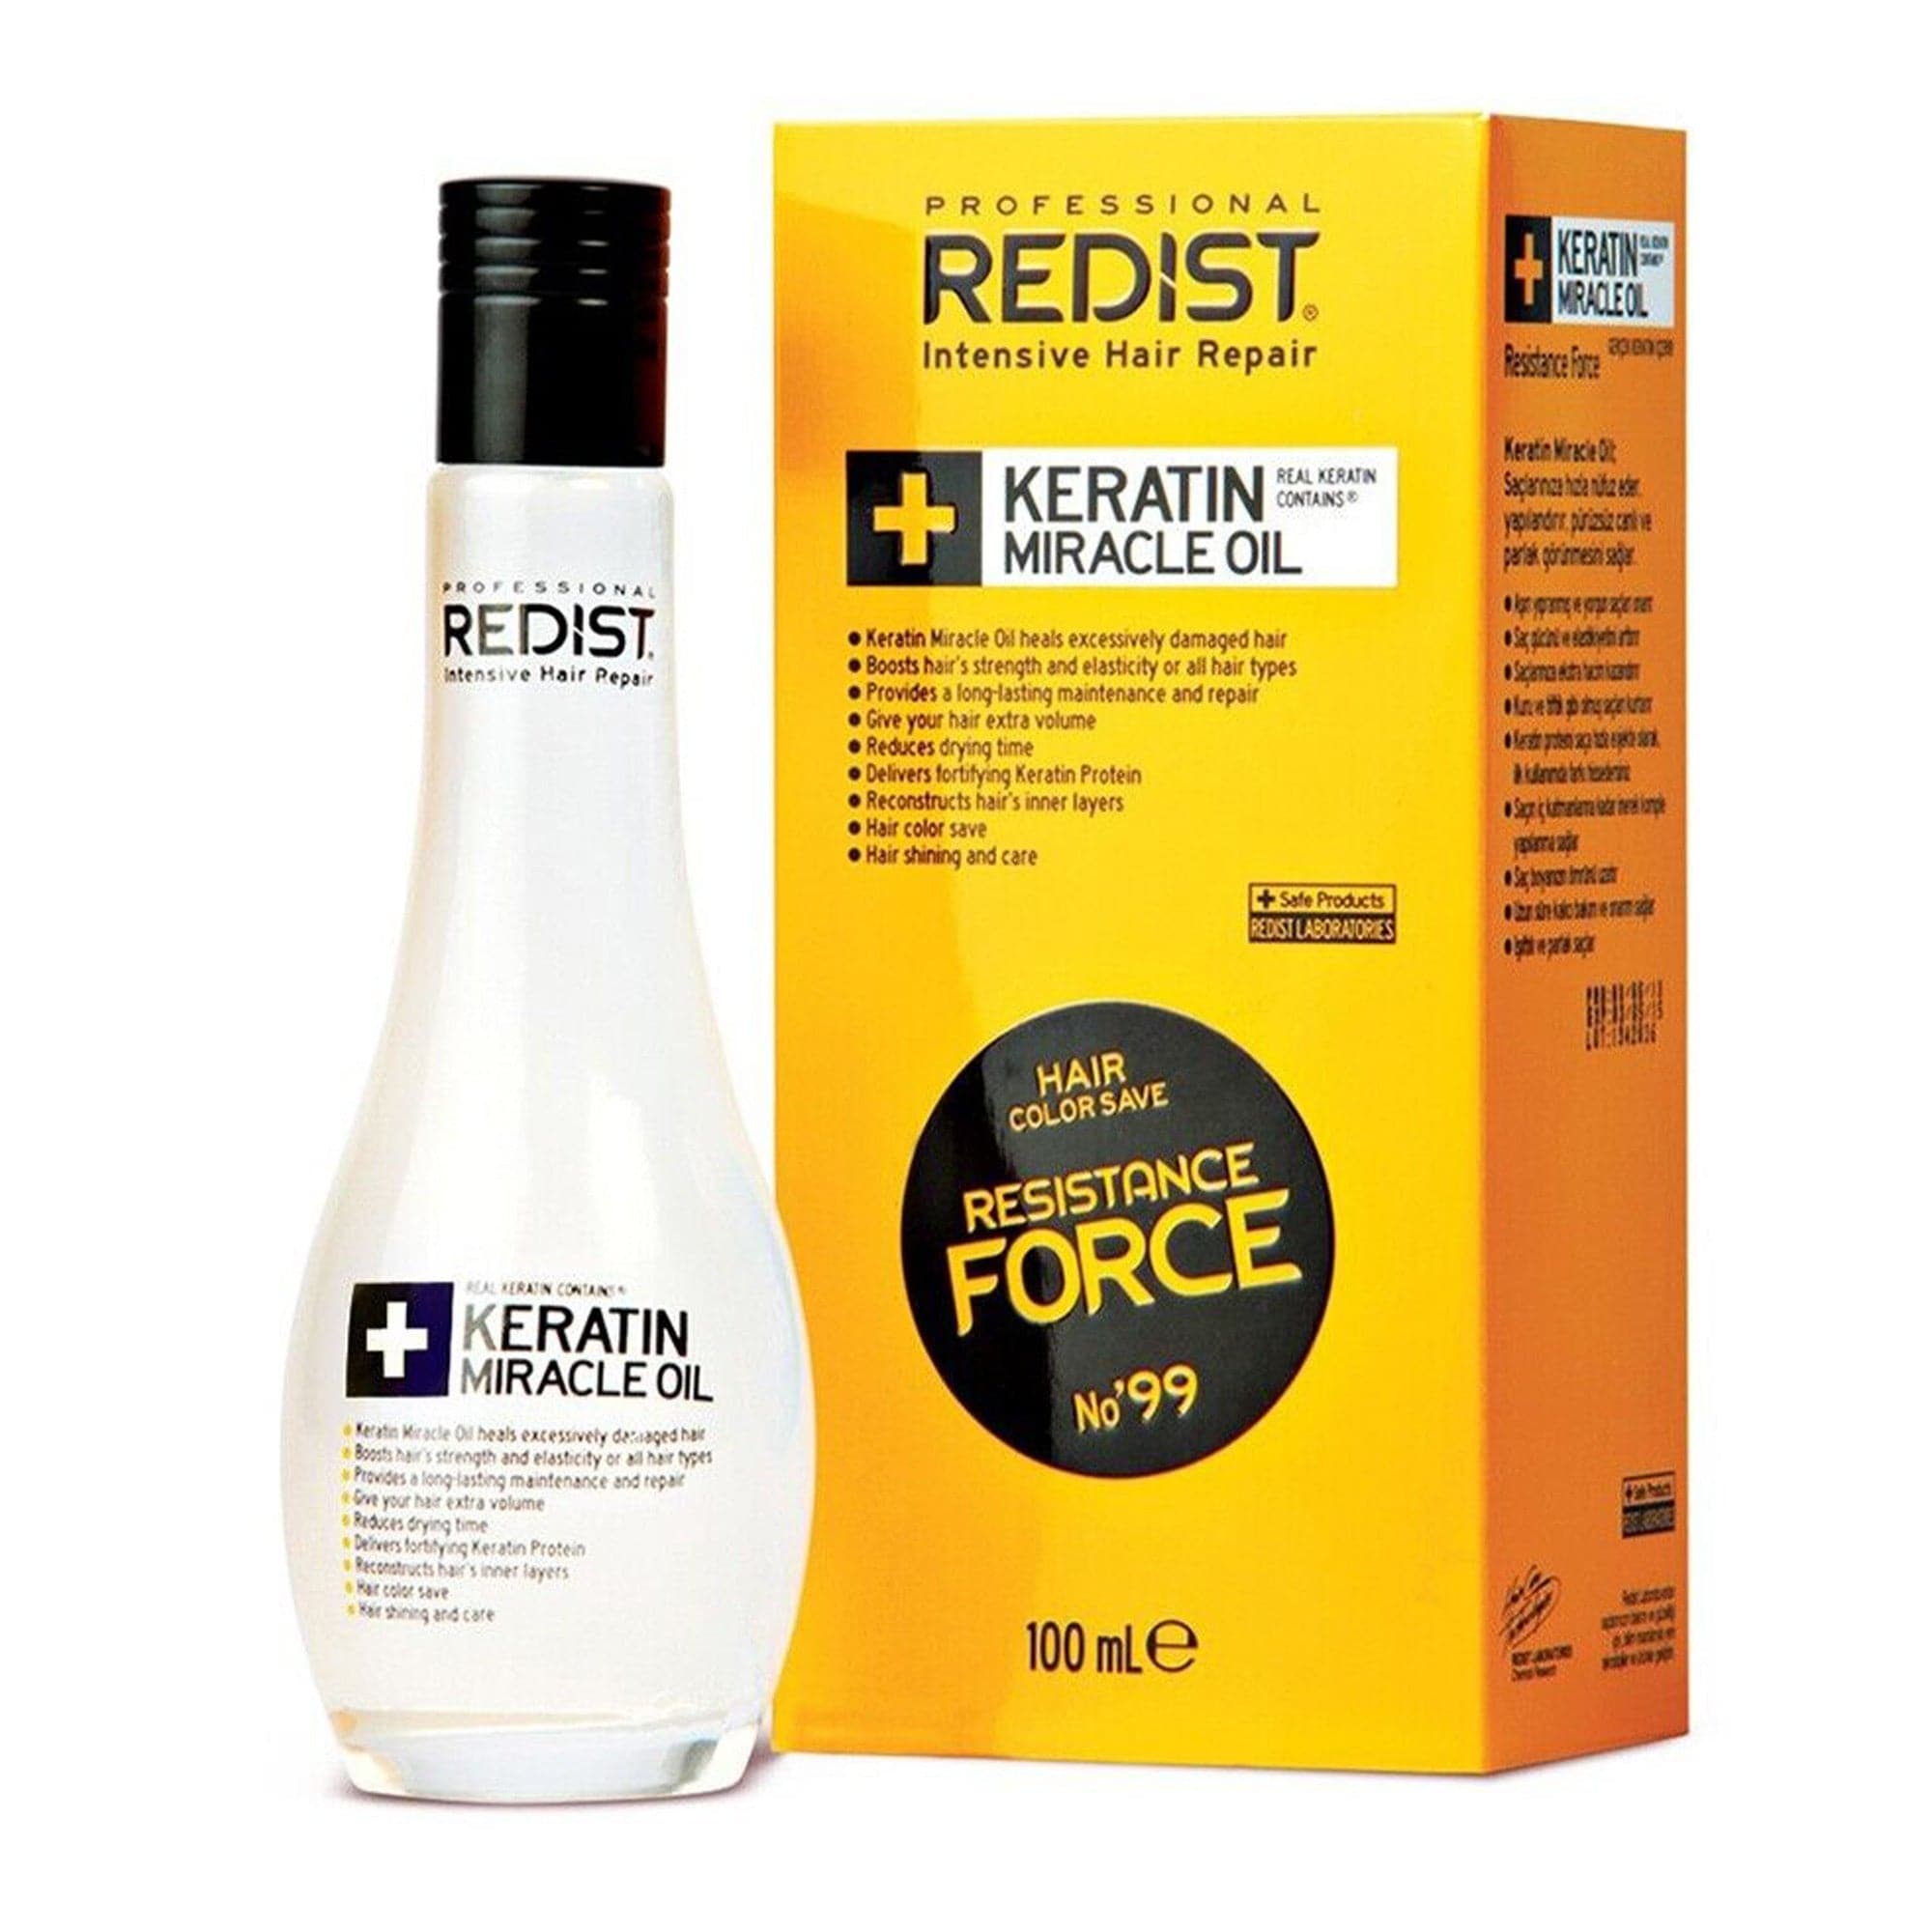 Redist - Keratin Miracle Oil Resistance Force no.99 100ml